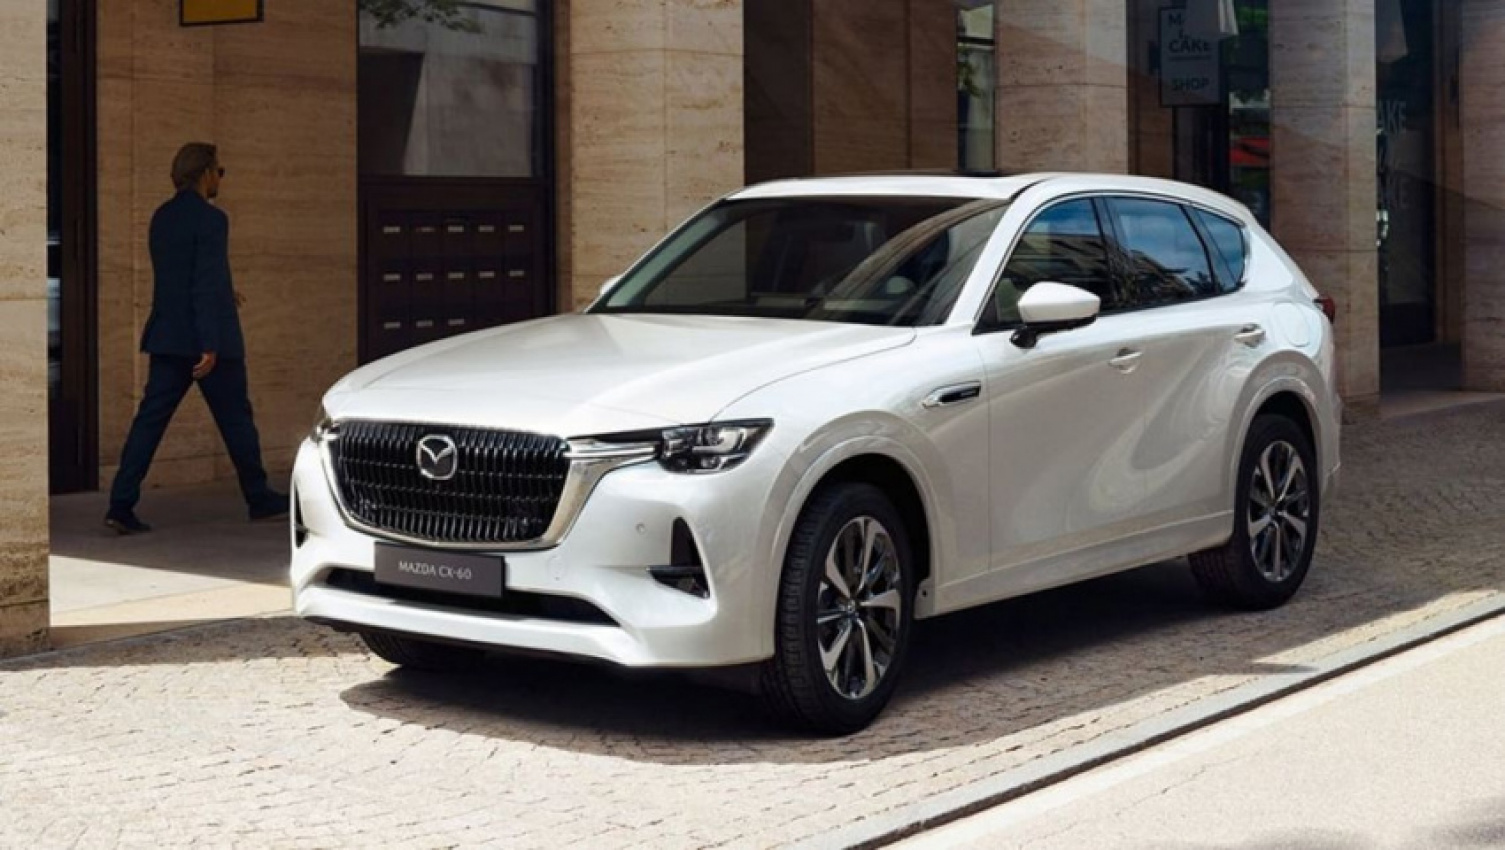 autos, bmw, cars, lexus, mazda, mercedes-benz, family cars, green cars, hybrid cars, industry news, mazda cx-60, mazda cx-60 2022, mazda news, mazda suv range, mercedes, plug-in hybrid, prestige & luxury cars, showroom news, 2022 mazda cx-60 positioned to stem buyers going upmarket to mercedes-benz, bmw and lexus